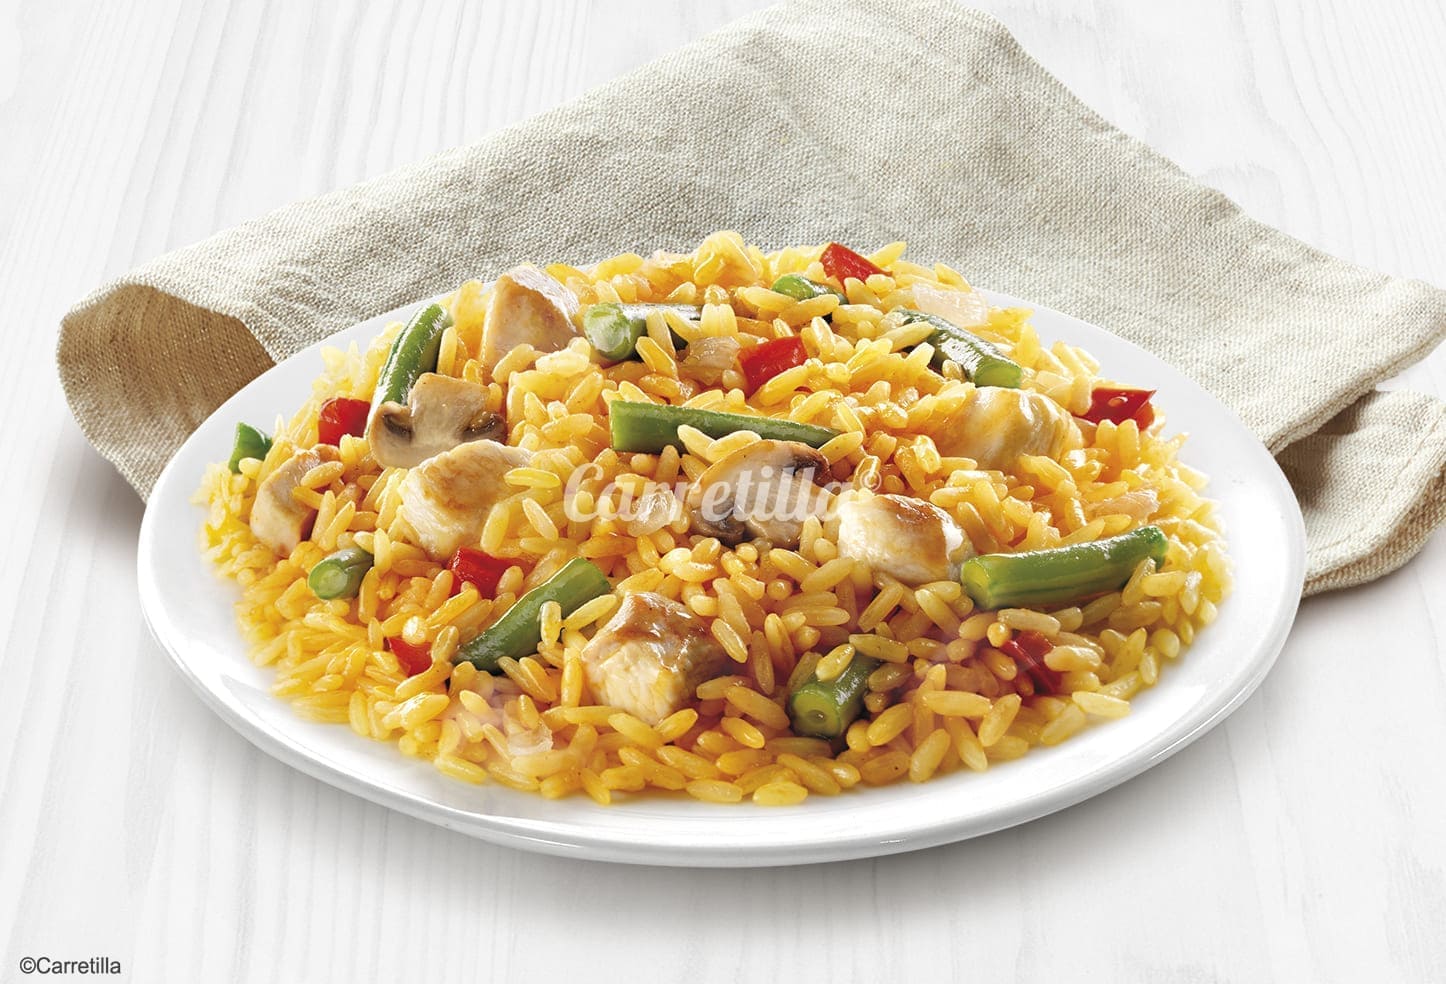 Chicken and Vegetable Paella